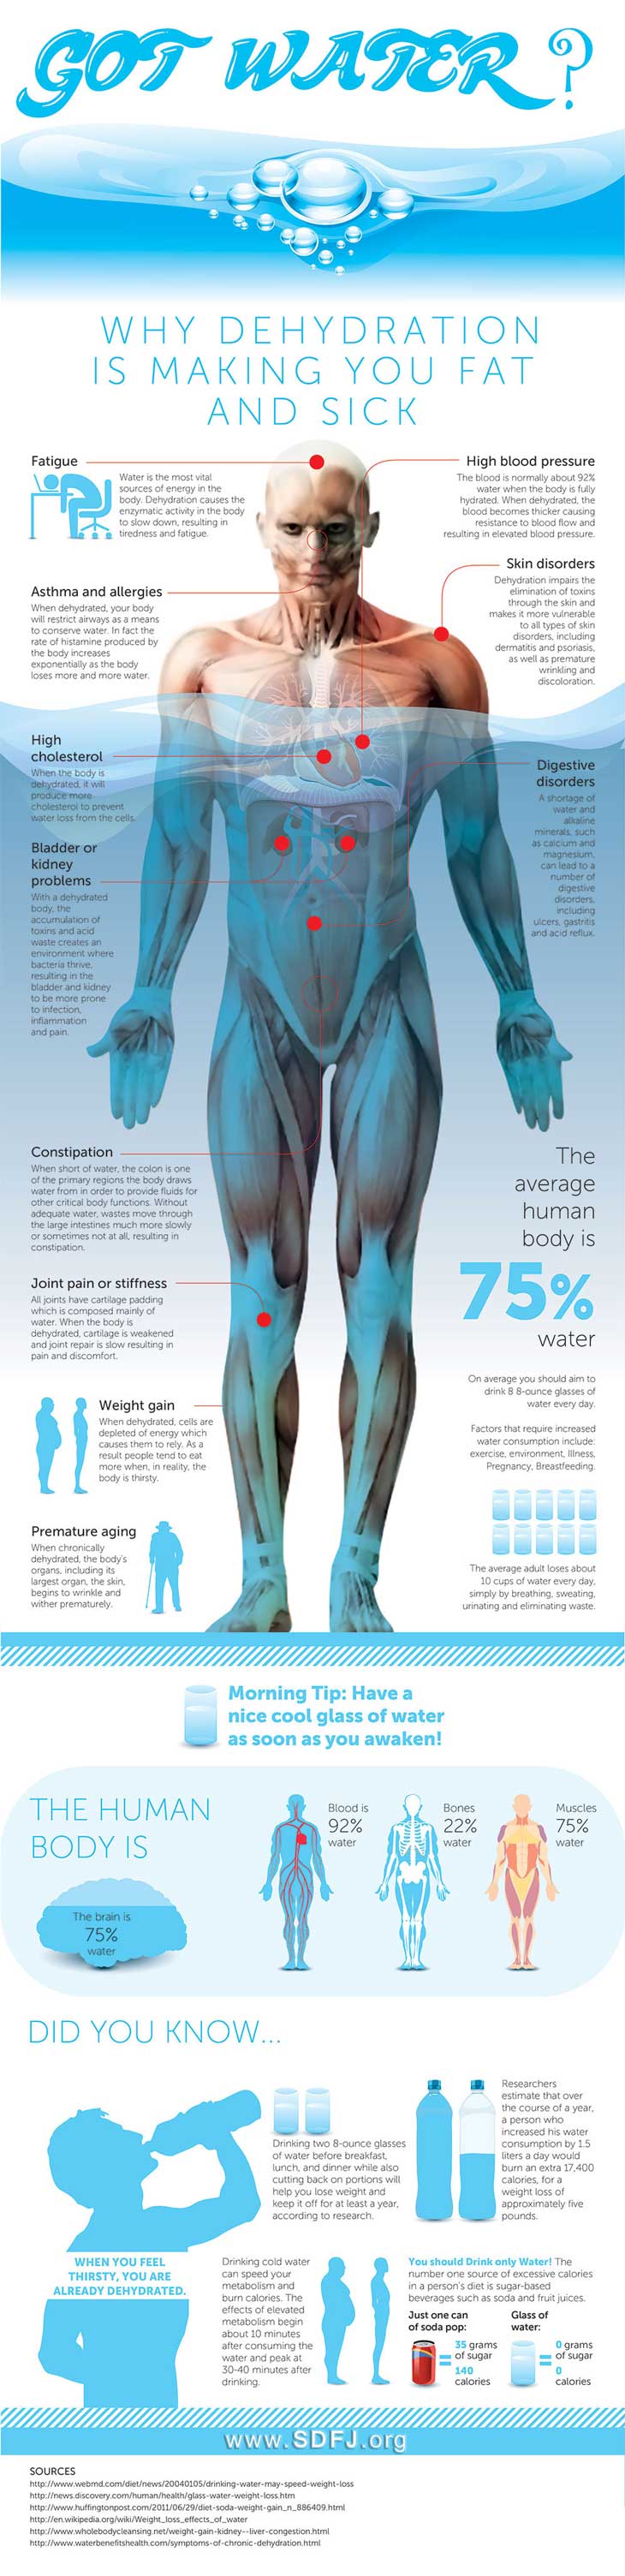 dehydration infographic